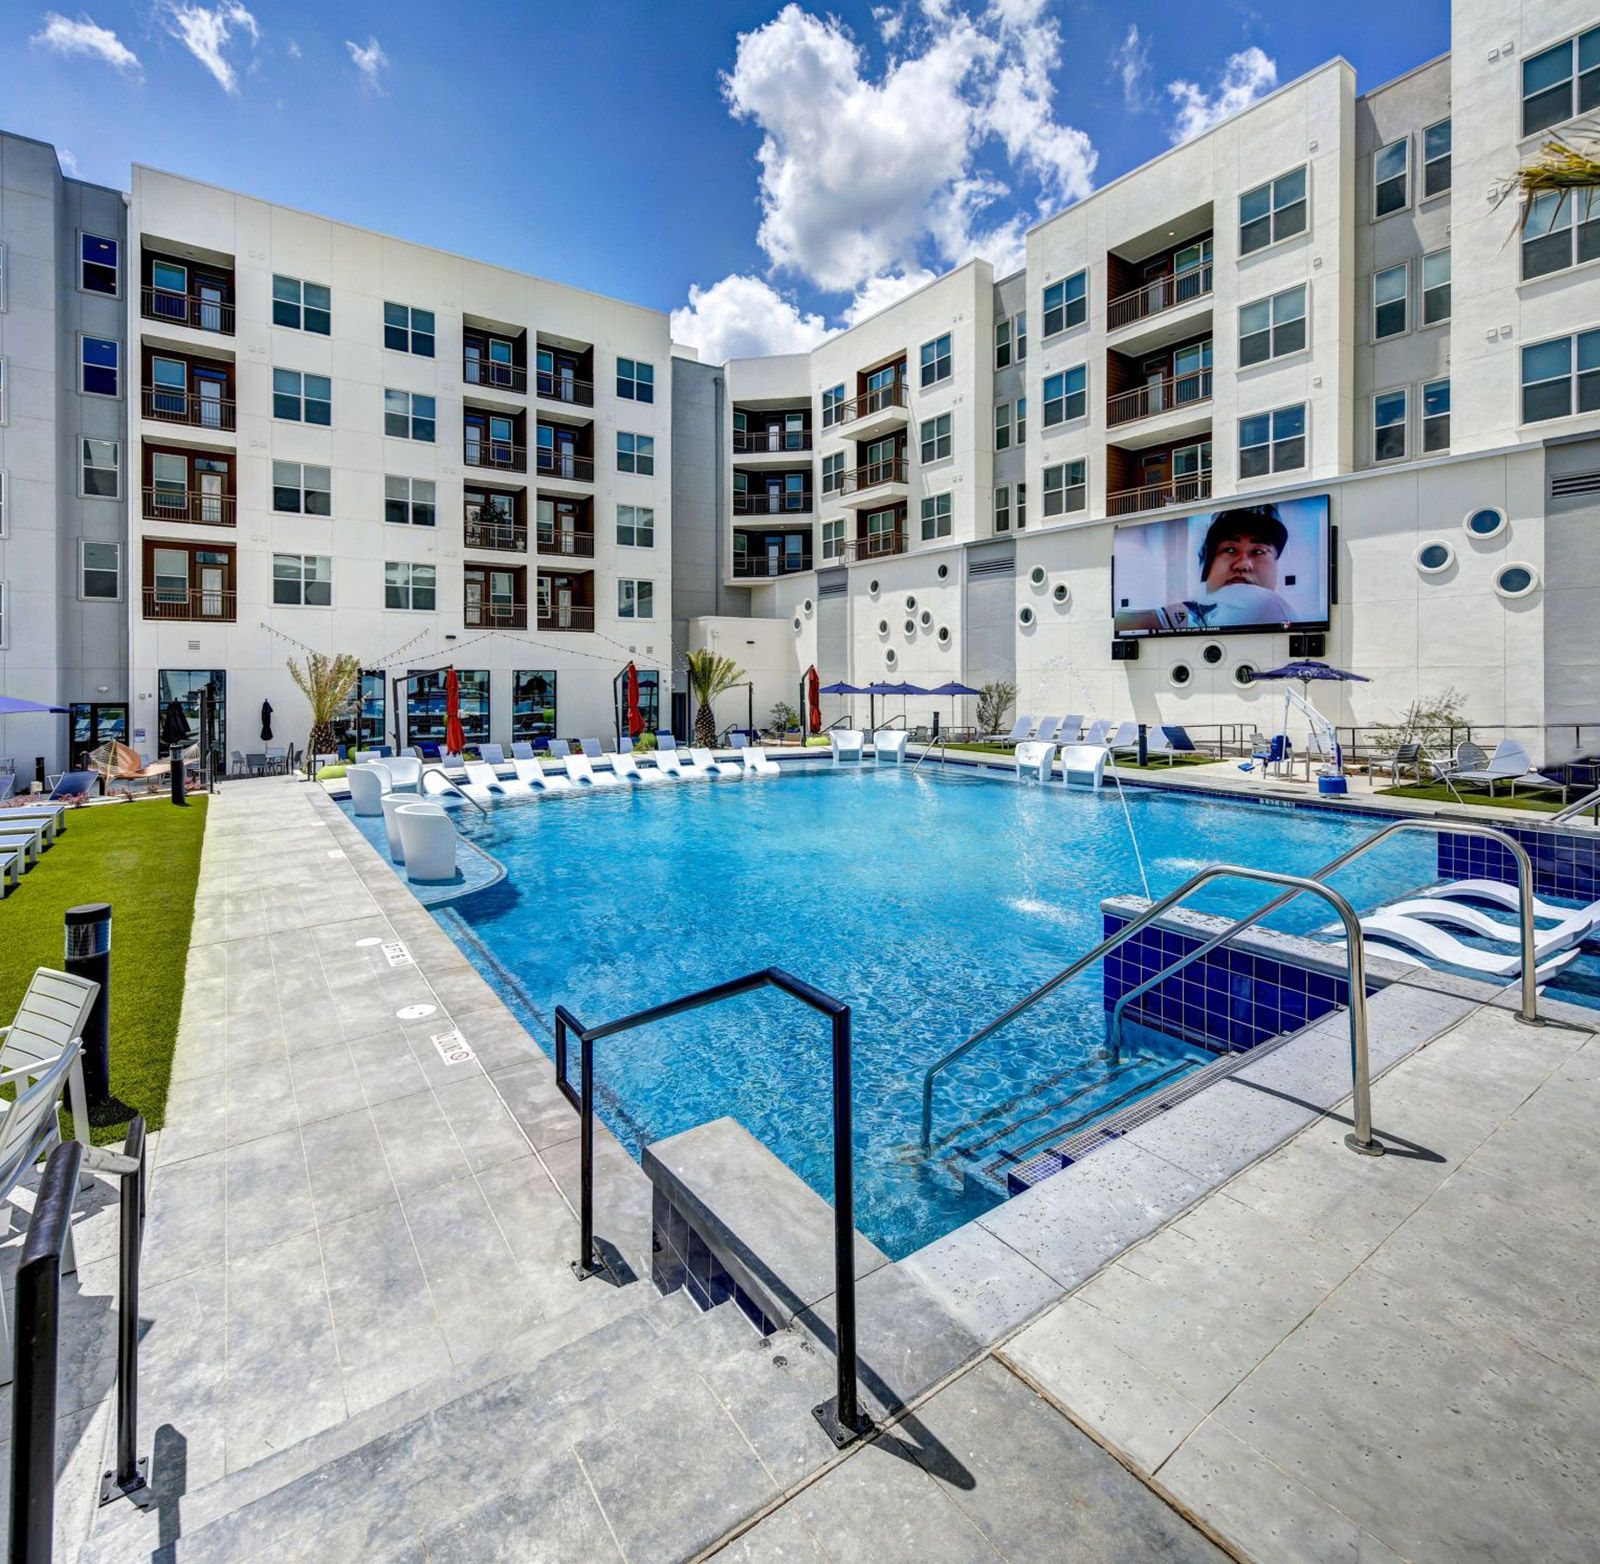 poolside with jumbotron San Marcos student housing